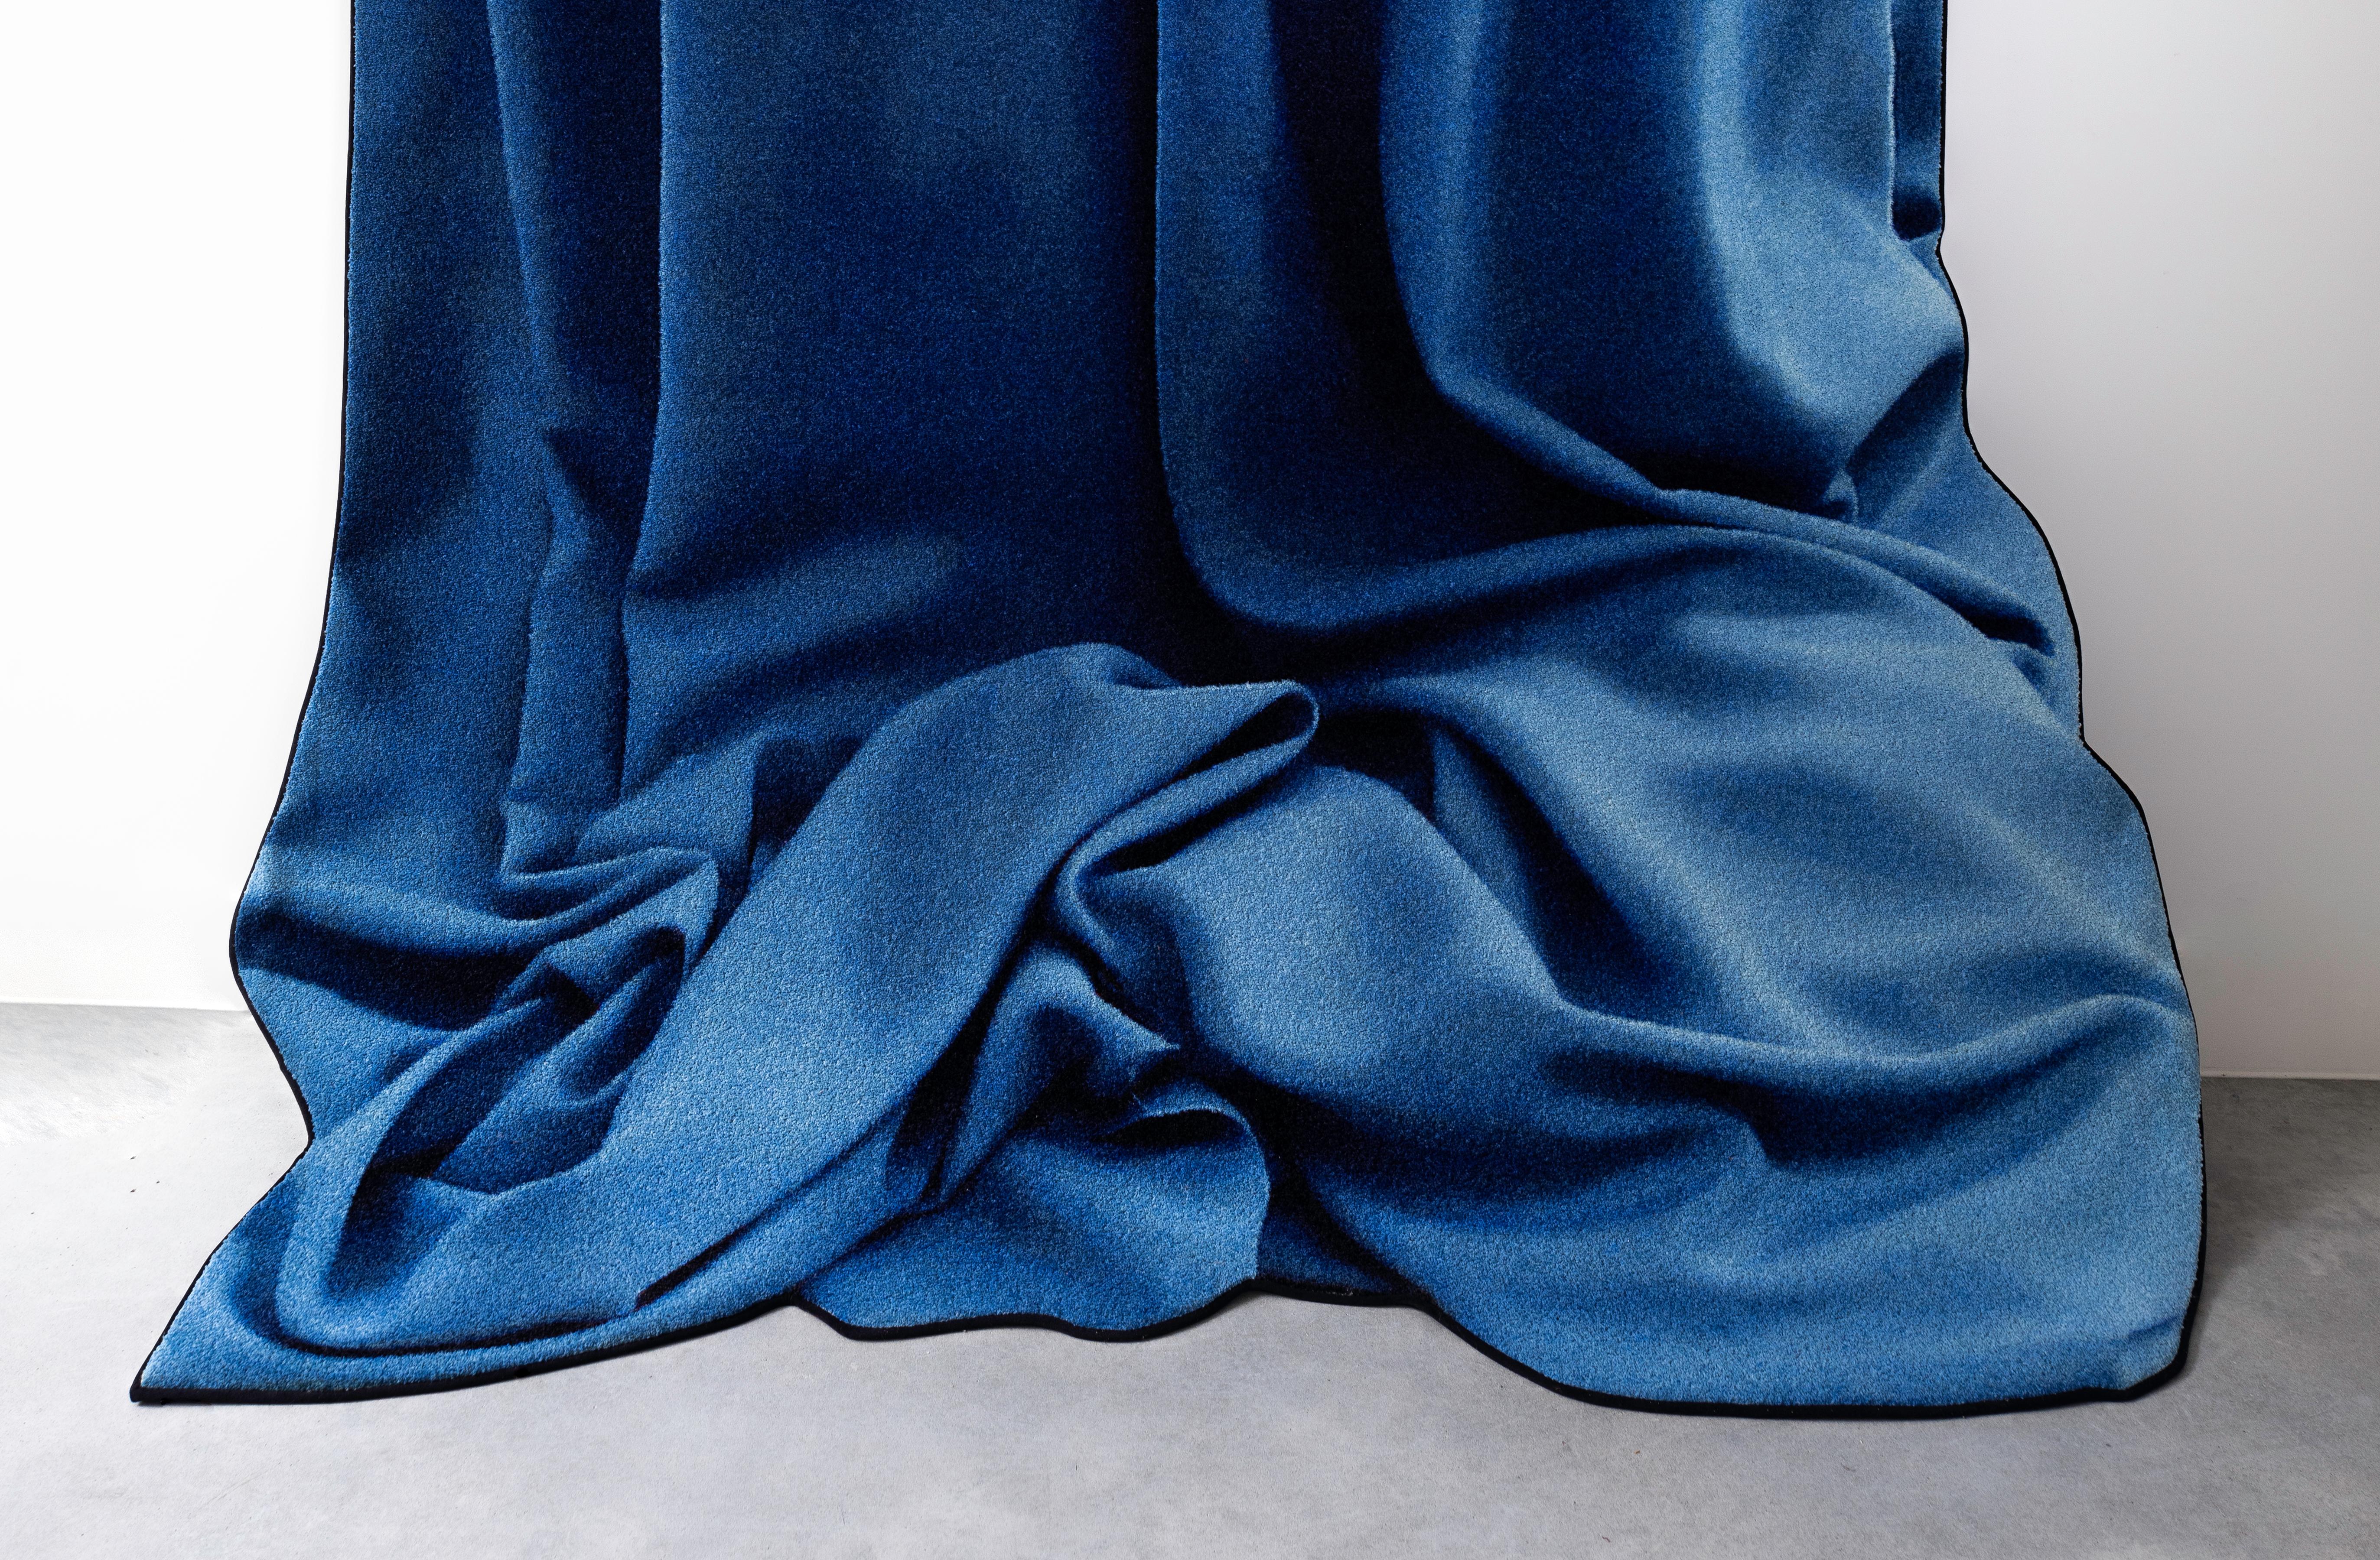 This piece of art is a real eyecatcher in any space. The folds and drapery look 3 dimensional, even when you stand right in front of it. But it is thick and flat as any rug. Applying the Classic 'Trompe l’oeil’ technique, using realistic imagery to